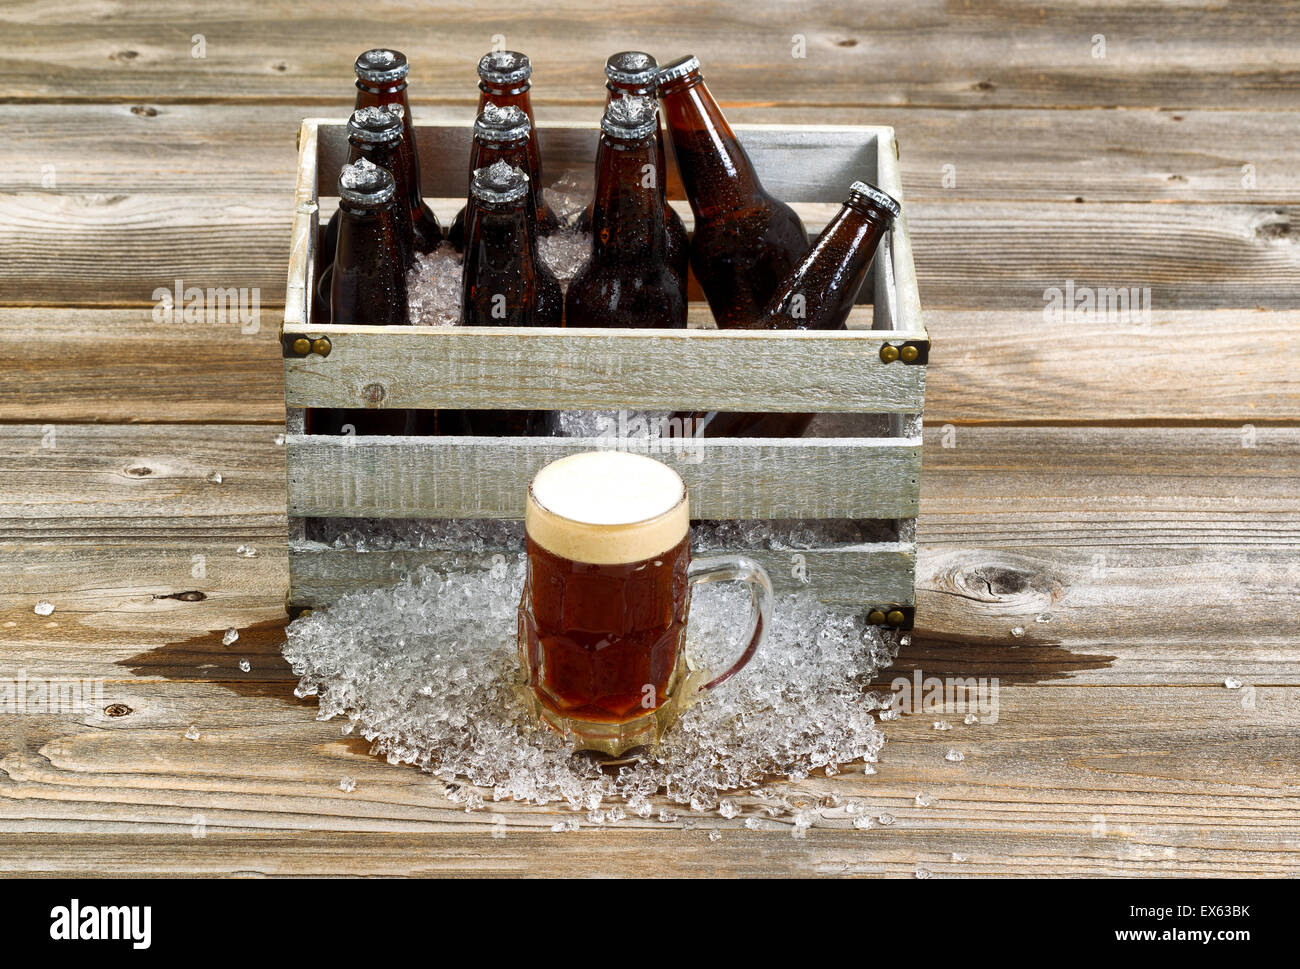 Front view of a frosty large glass mug of dark beer with vintage crate filled with bottled beer and crushed ice on rustic wooden Stock Photo